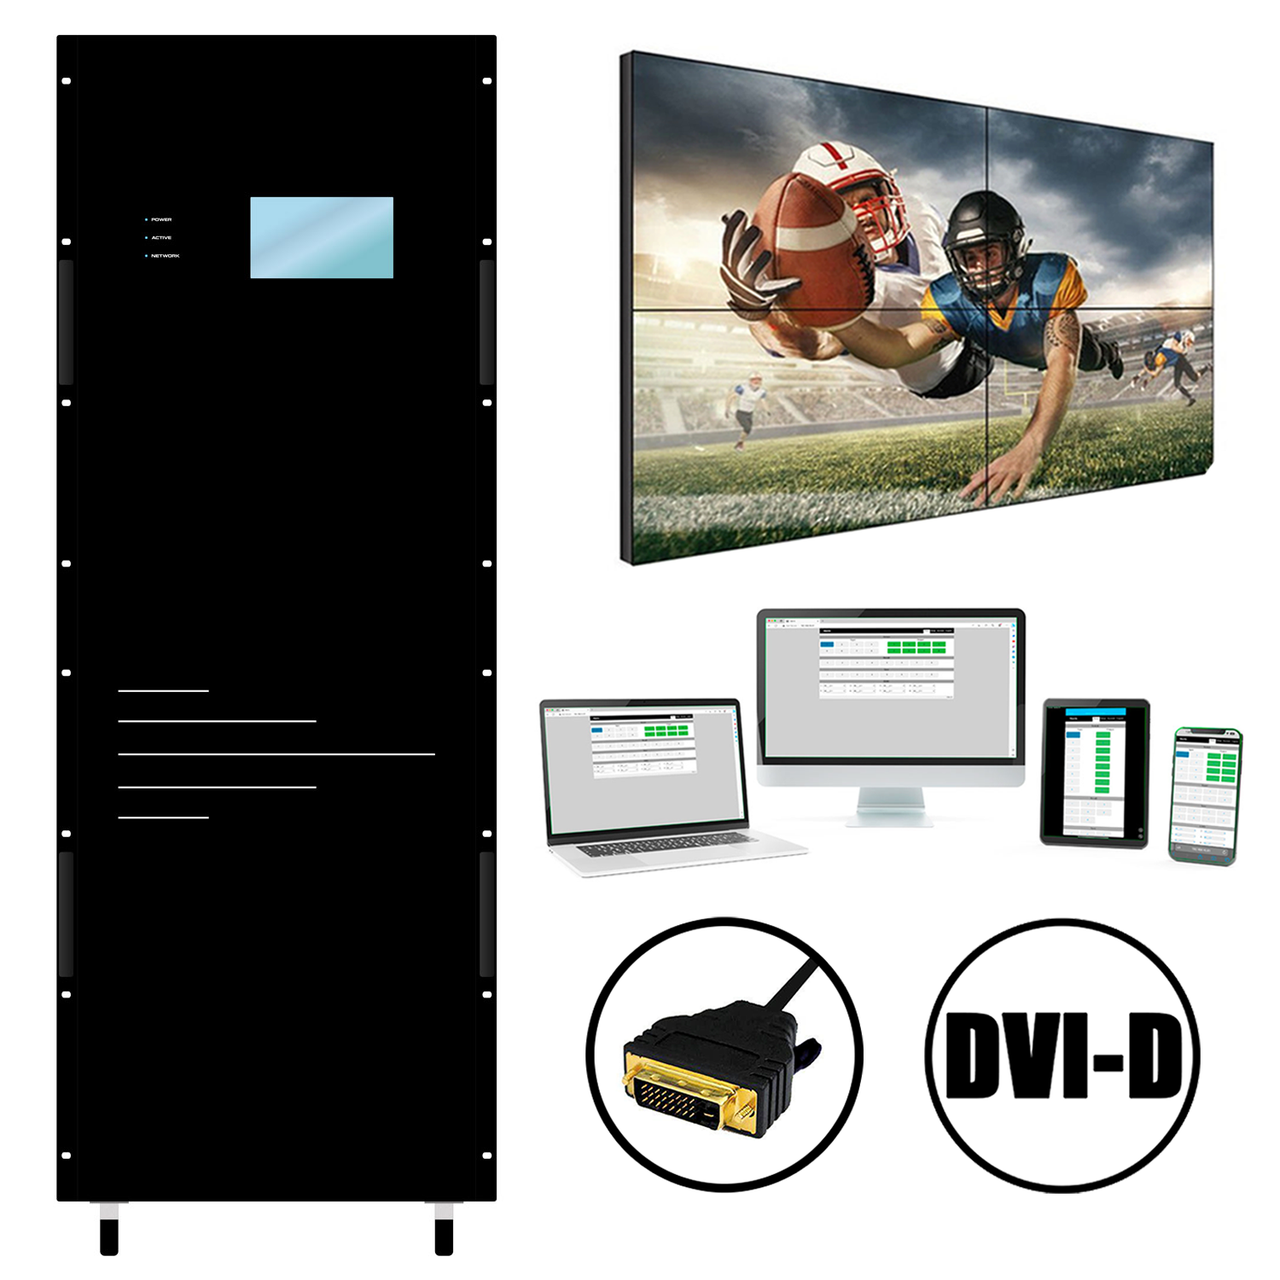 Up To 160x160 DVI Matrix Switchs with Video Walls